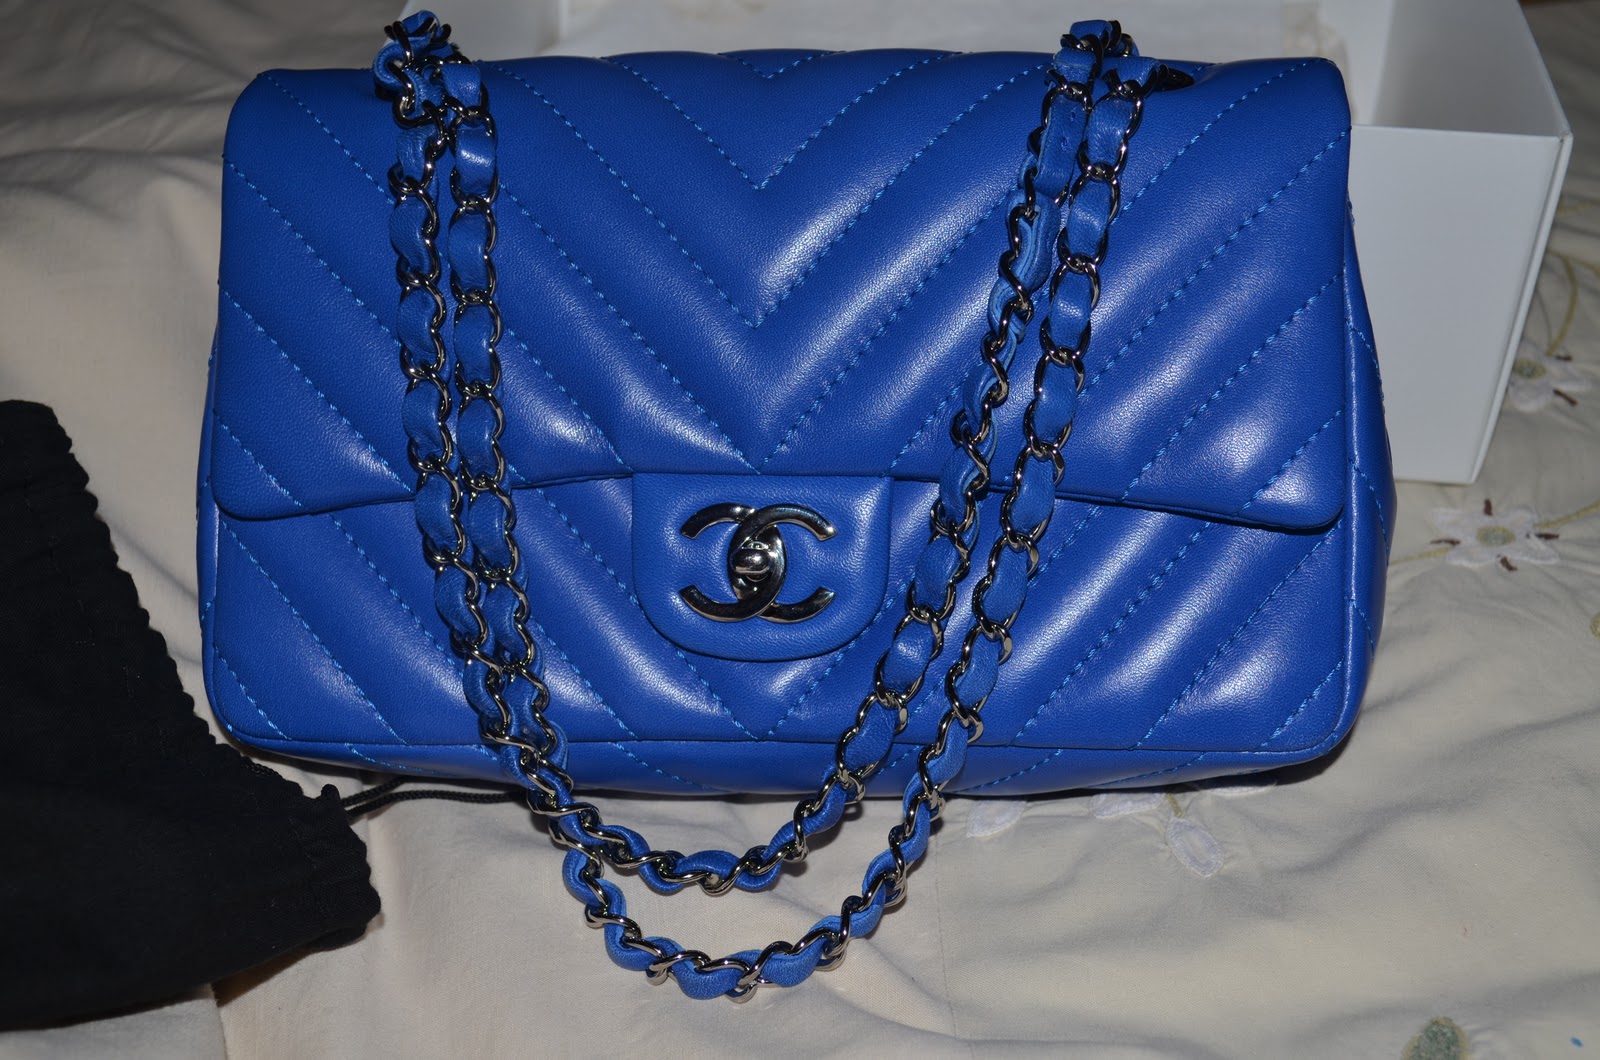 ADDICTED FASHIONISTA: Authentic Electric Blue Chanel Bag For SALE !